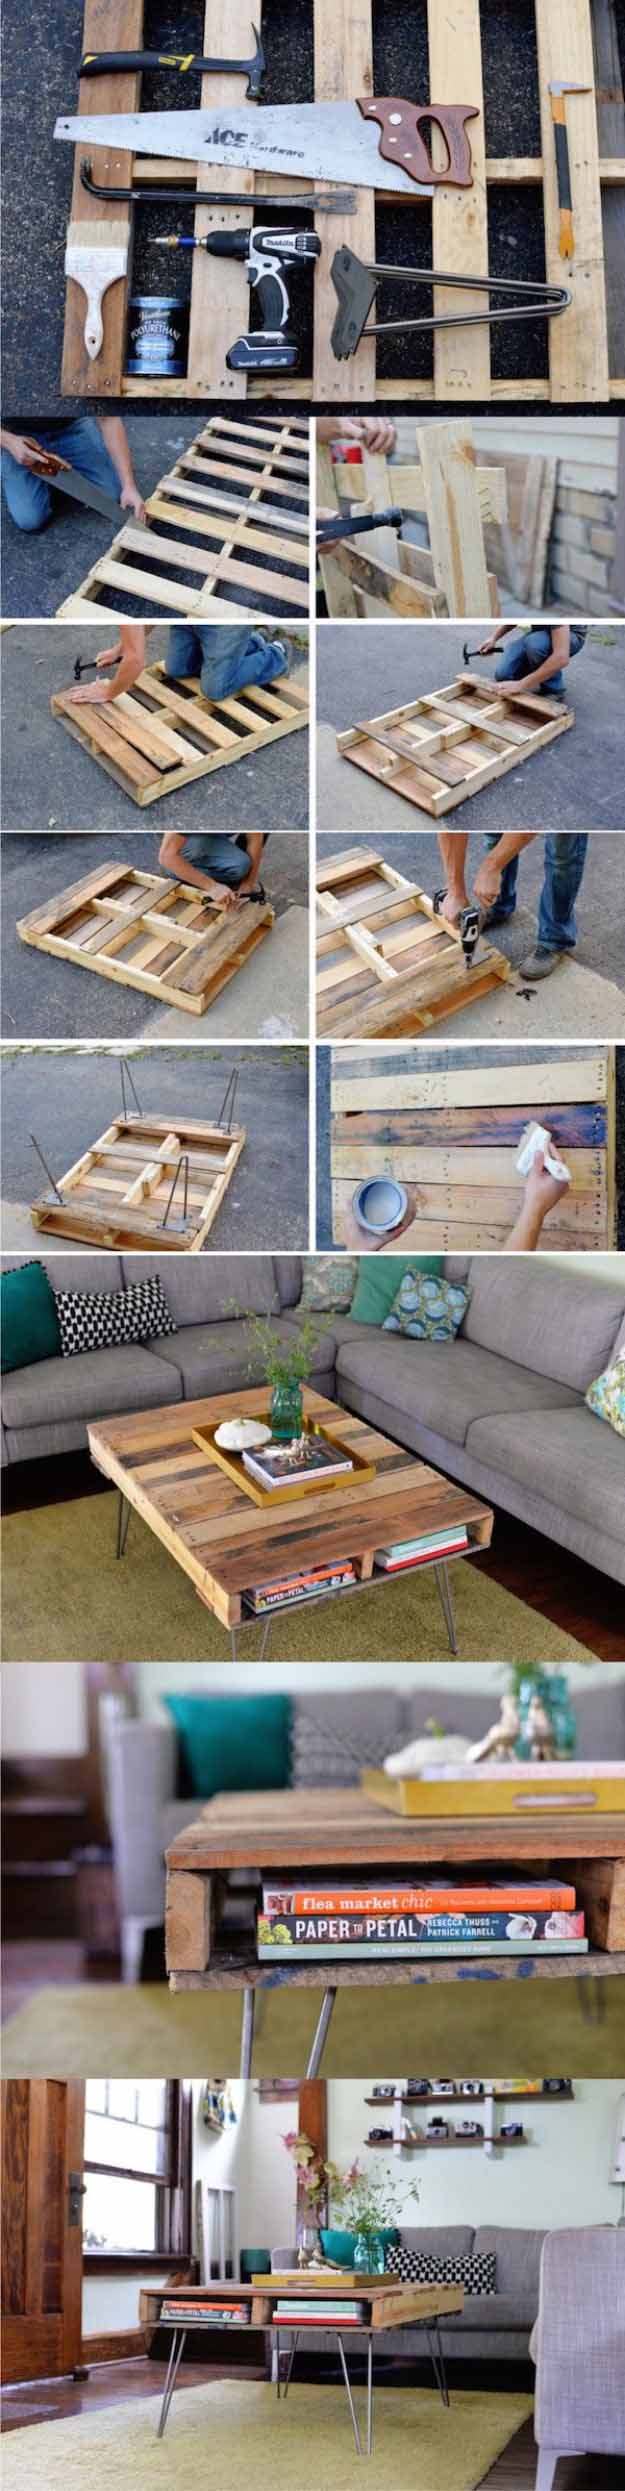 Easy DIY Home Decor Projects| DIY Pallet Furniture Tutorial | Cheap Coffee Table Ideas | DIY Projects and Crafts by DIY JOY  at http://diyjoy.com/diy-home-decor-coffee-table-ideas